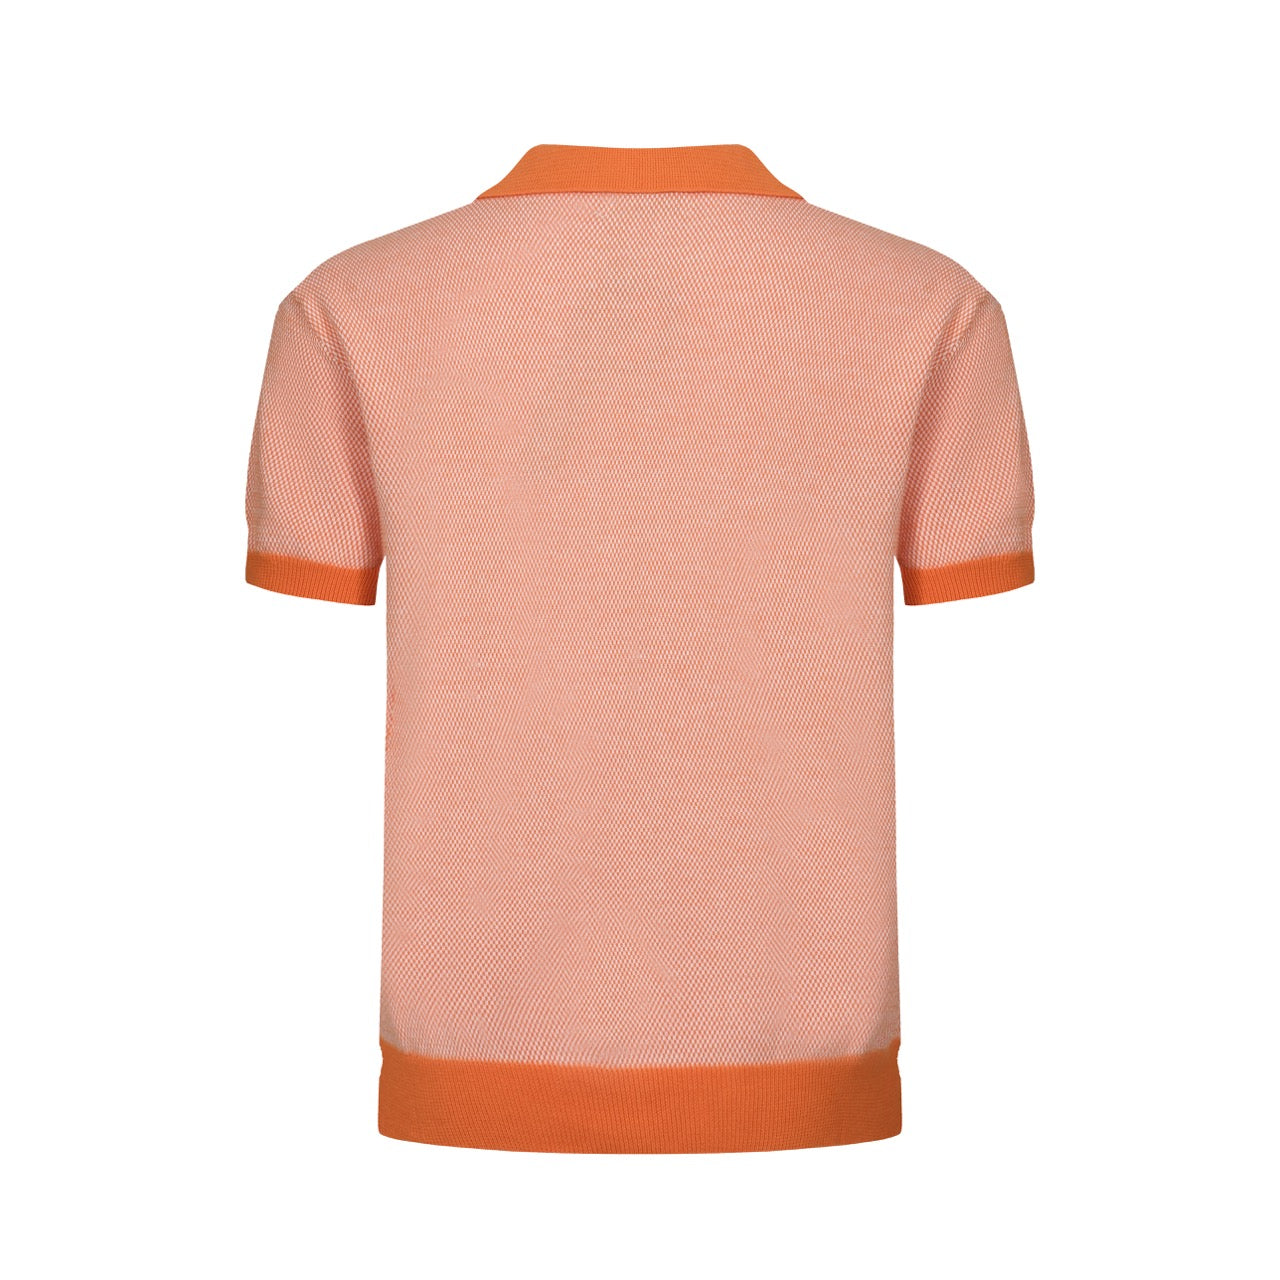 OXKNIT Men Vintage Clothing 1960s Mod Style Casual Orange Knitted Retro Polo